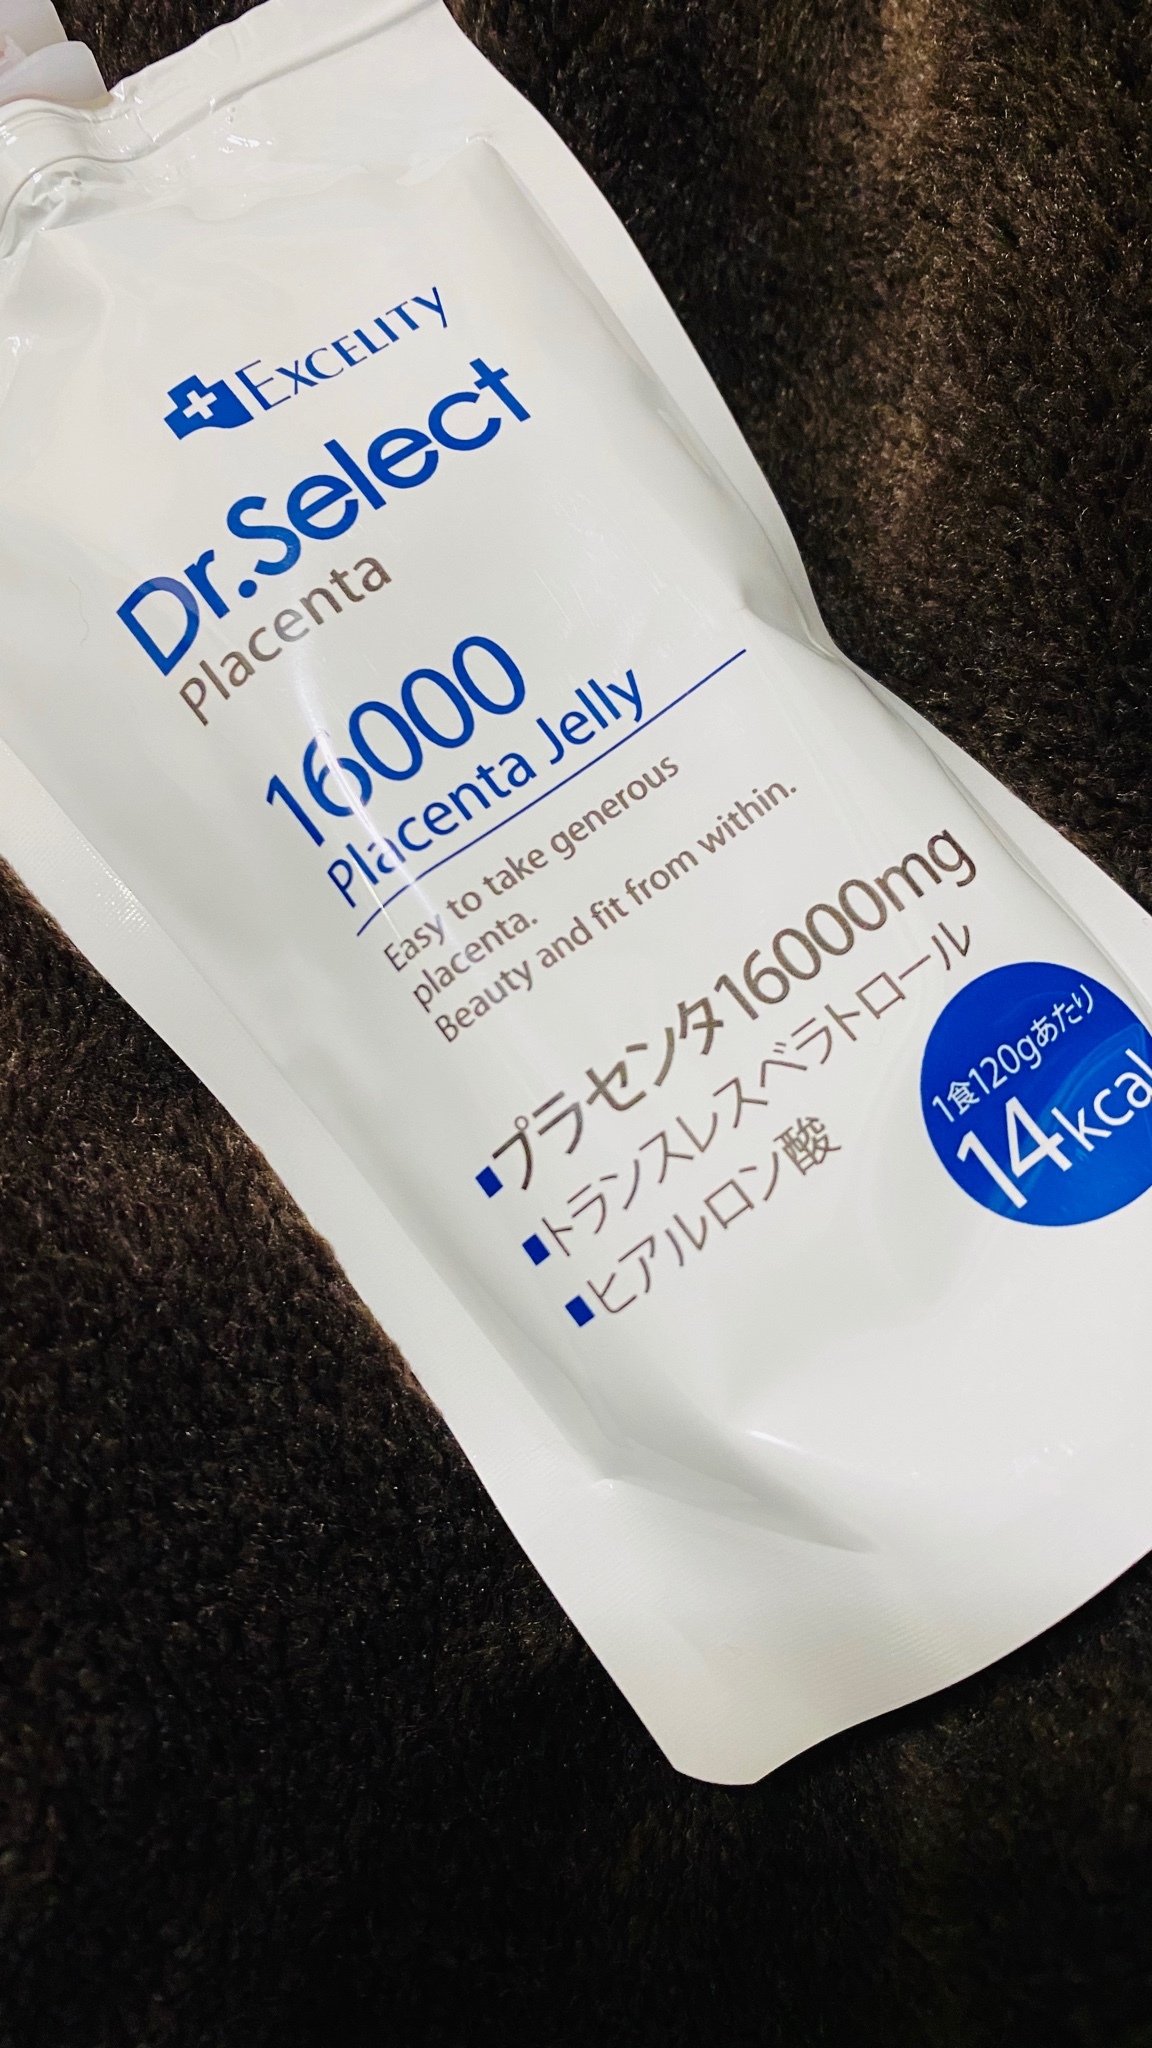 Excelity Dr.Select / プラセンタ16000ゼリーの公式商品情報｜美容